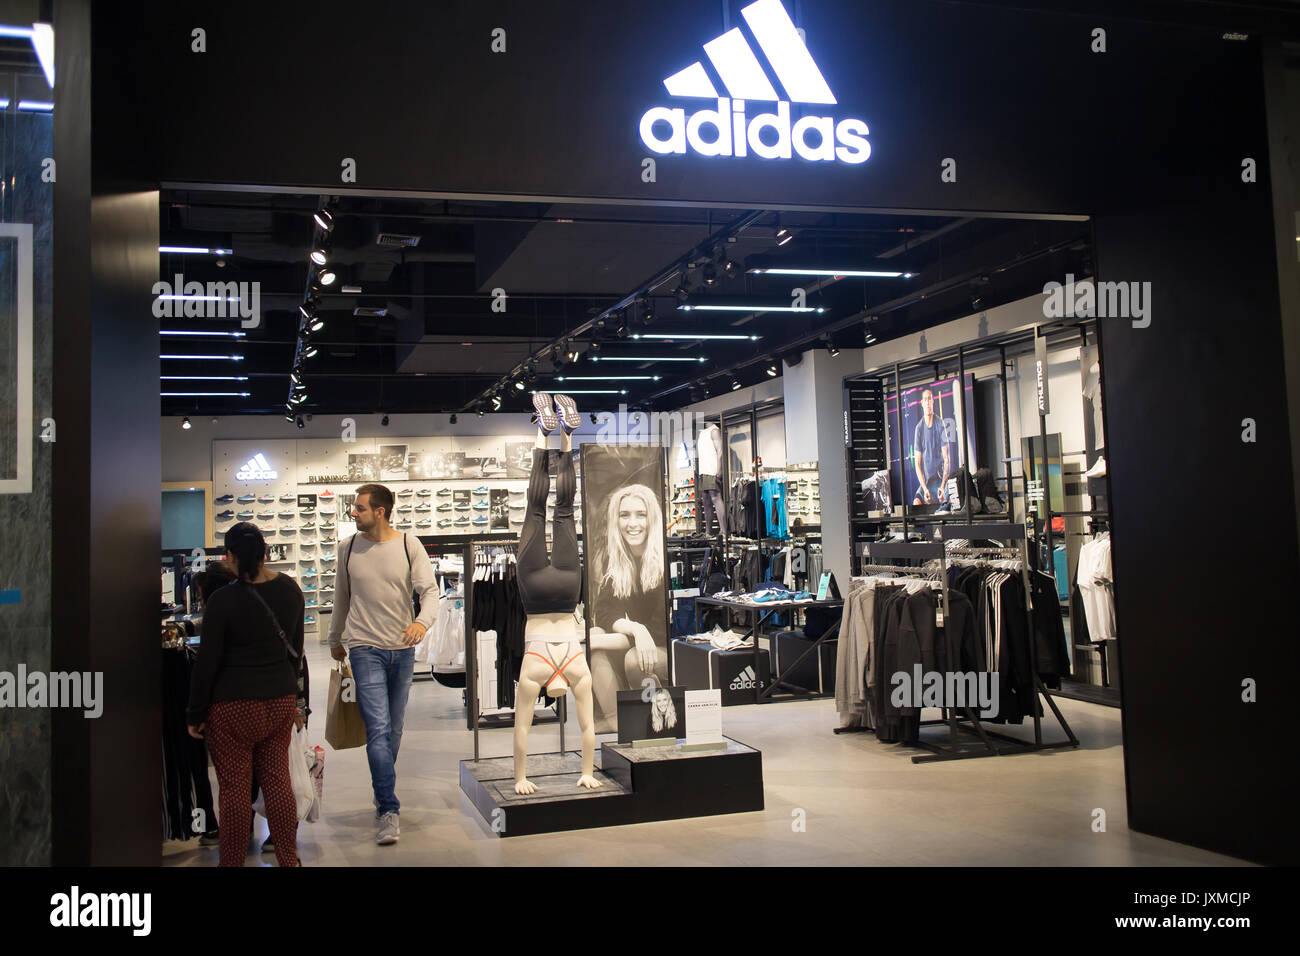 adidas central store